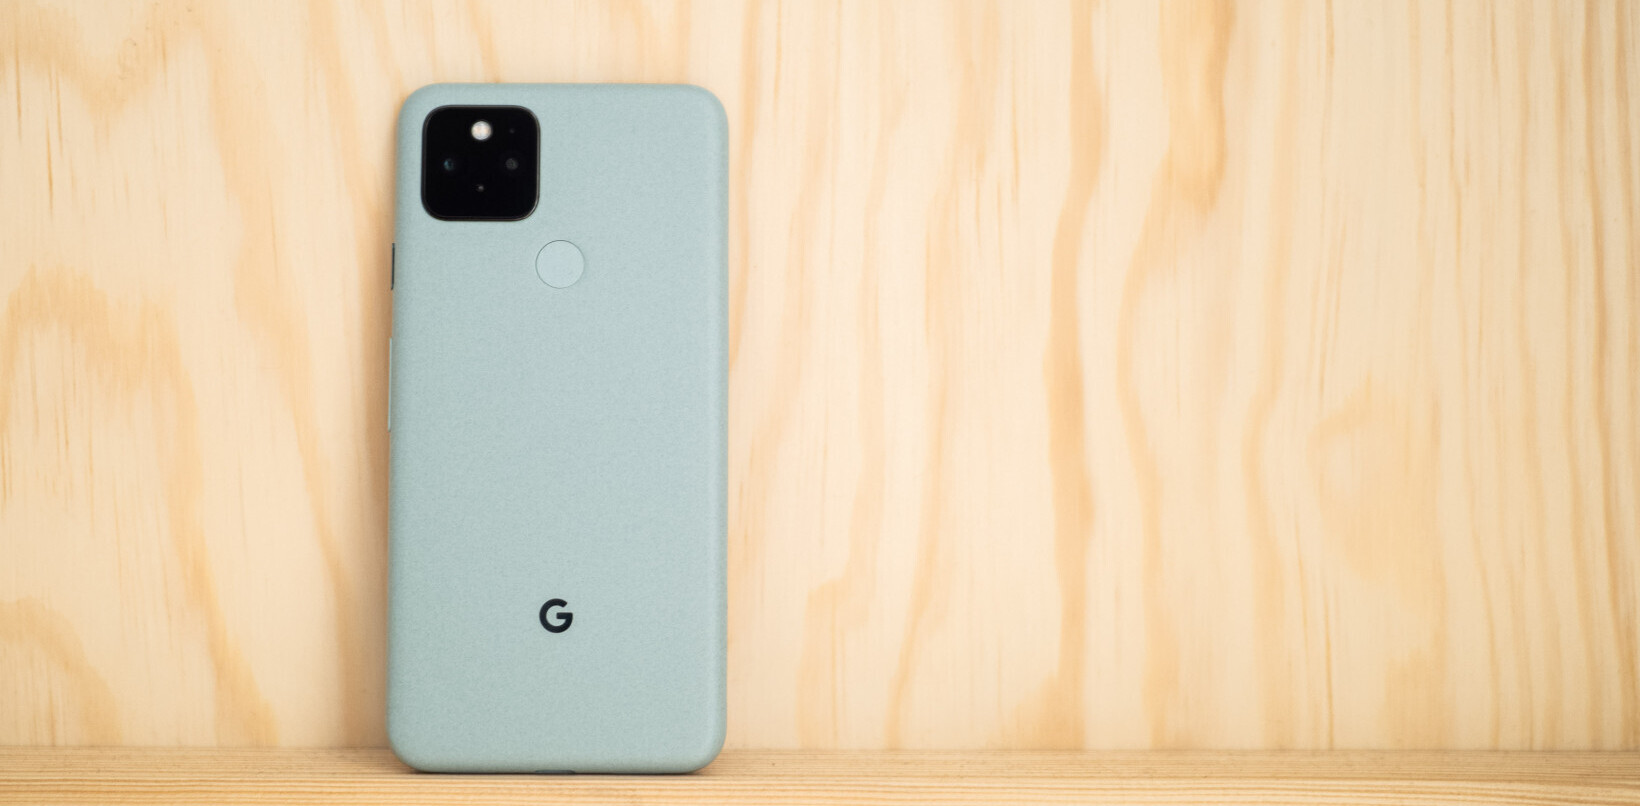 Google’s latest Pixel feature drop includes an underwater photo mode